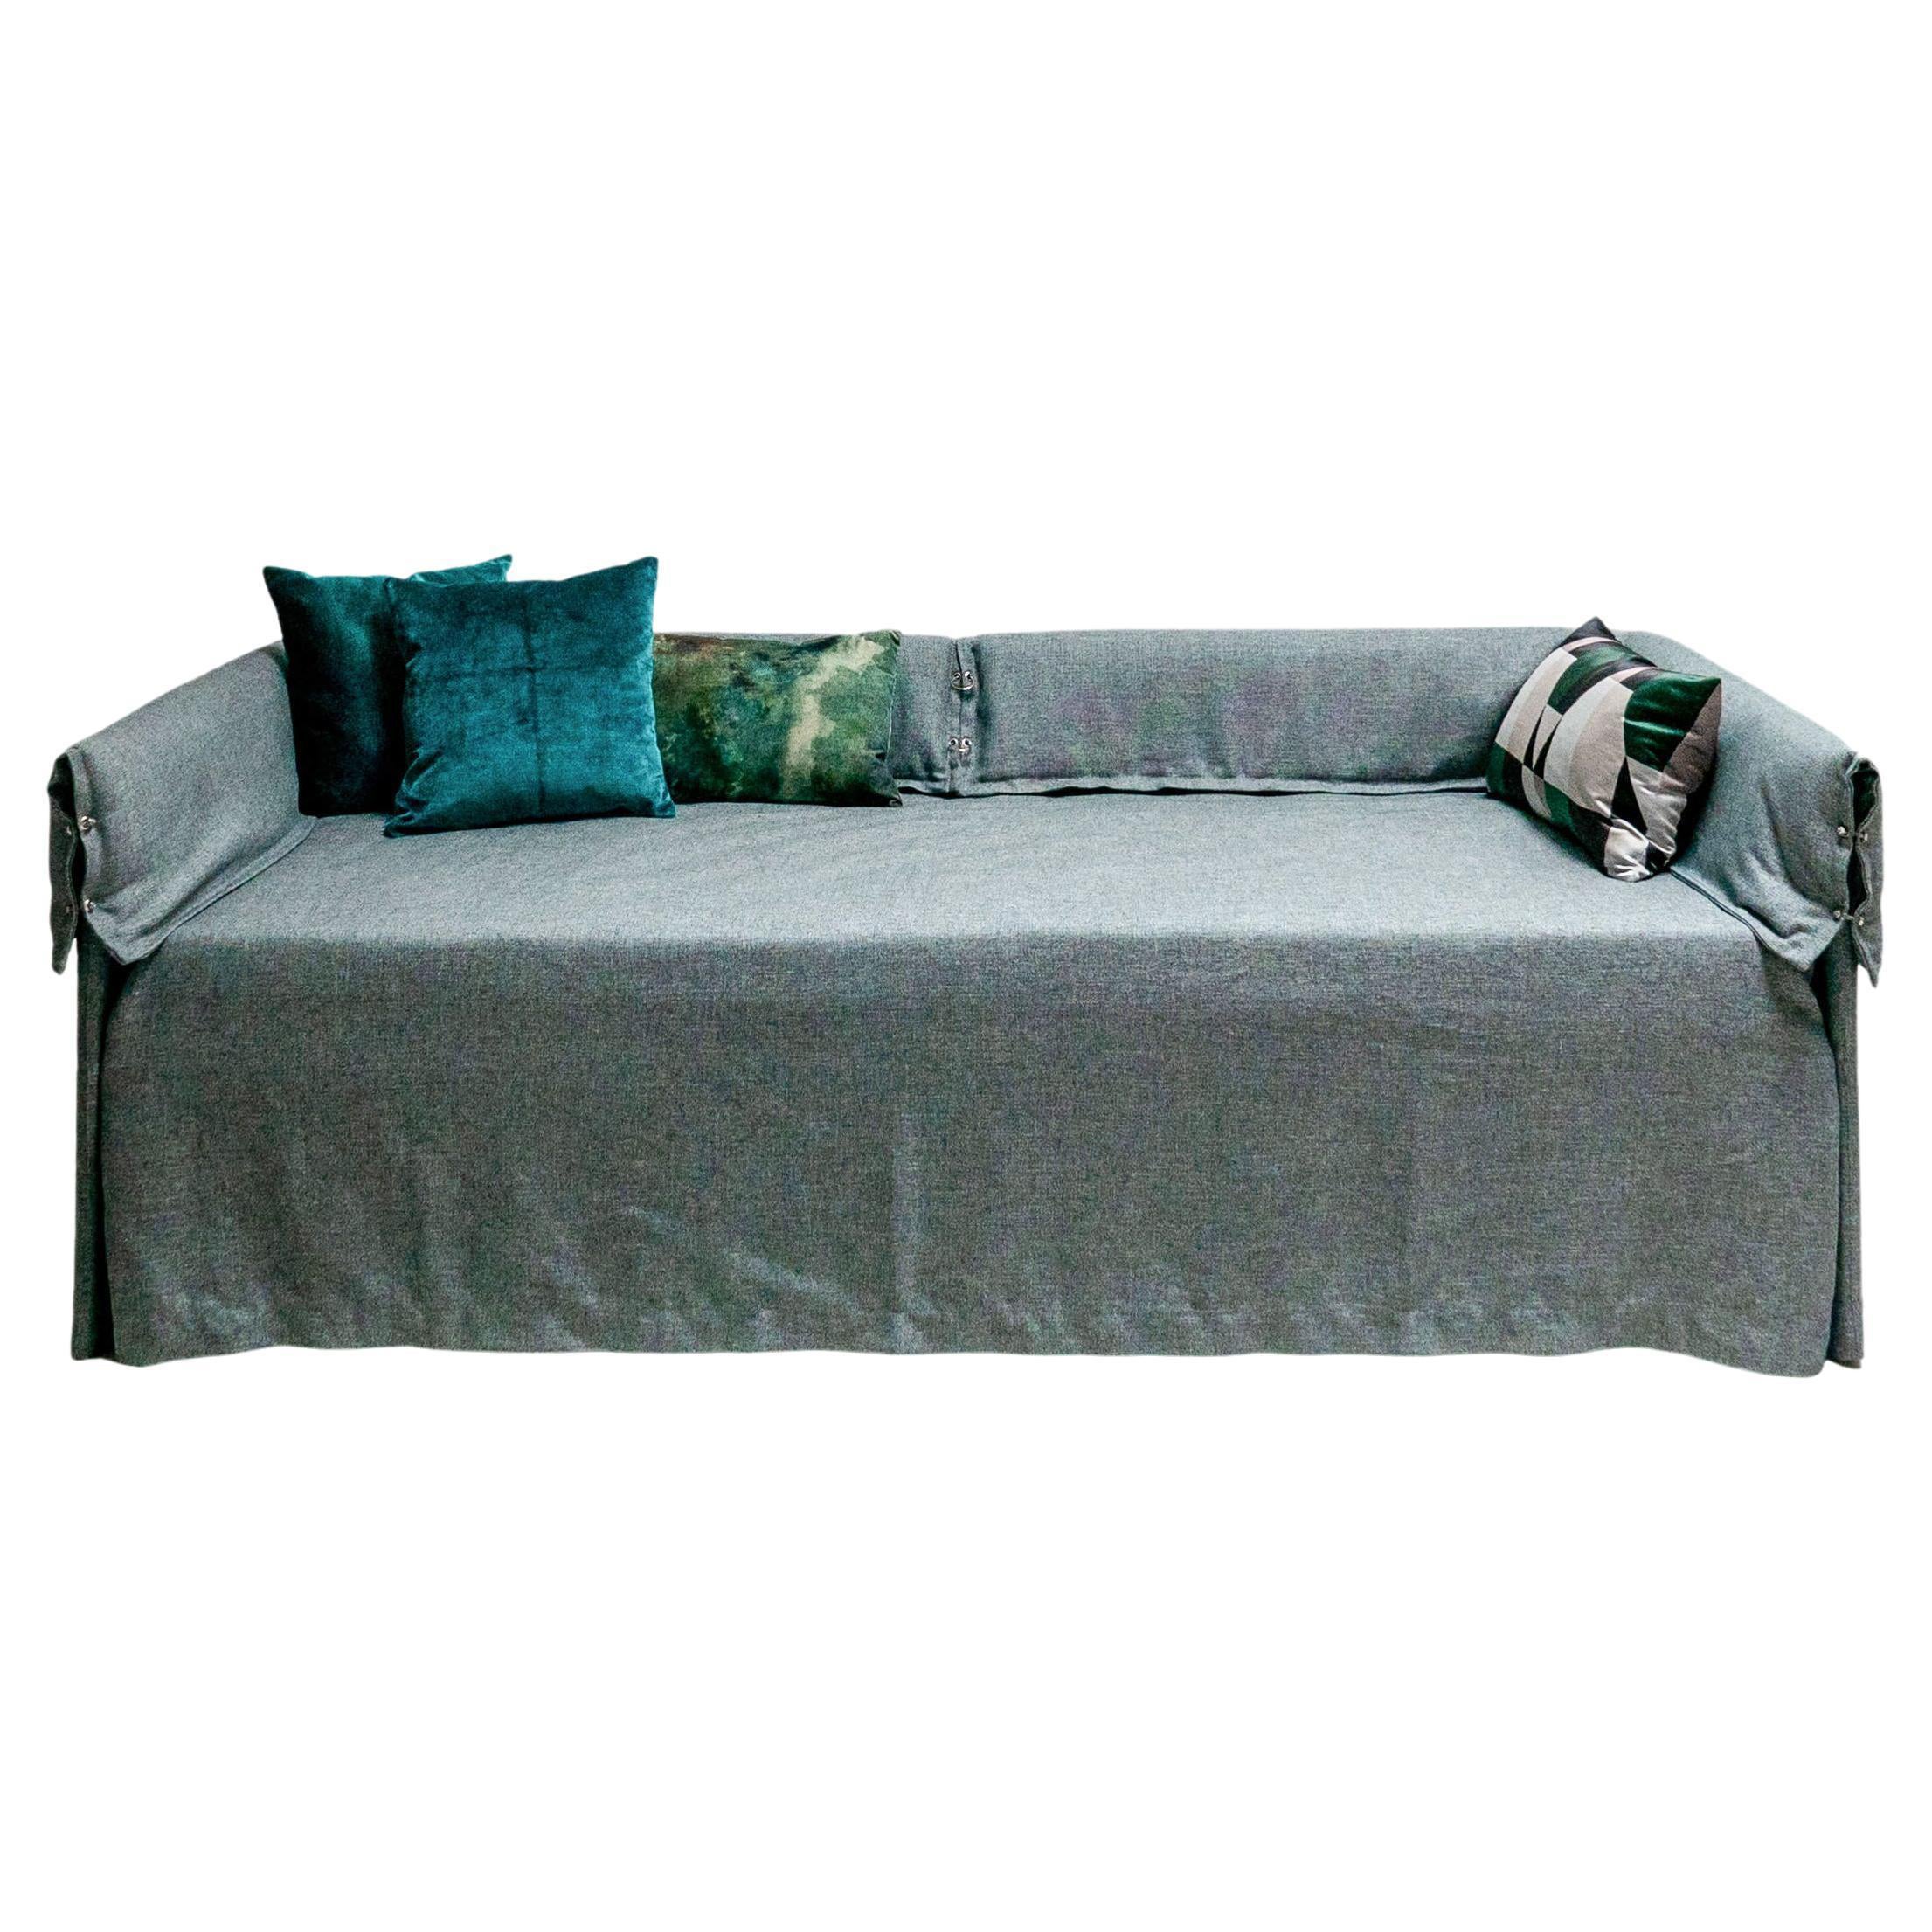 Contemporary Italian Sofa Bed by Spinzi, Green Fabric Upholstery, Bolts Details